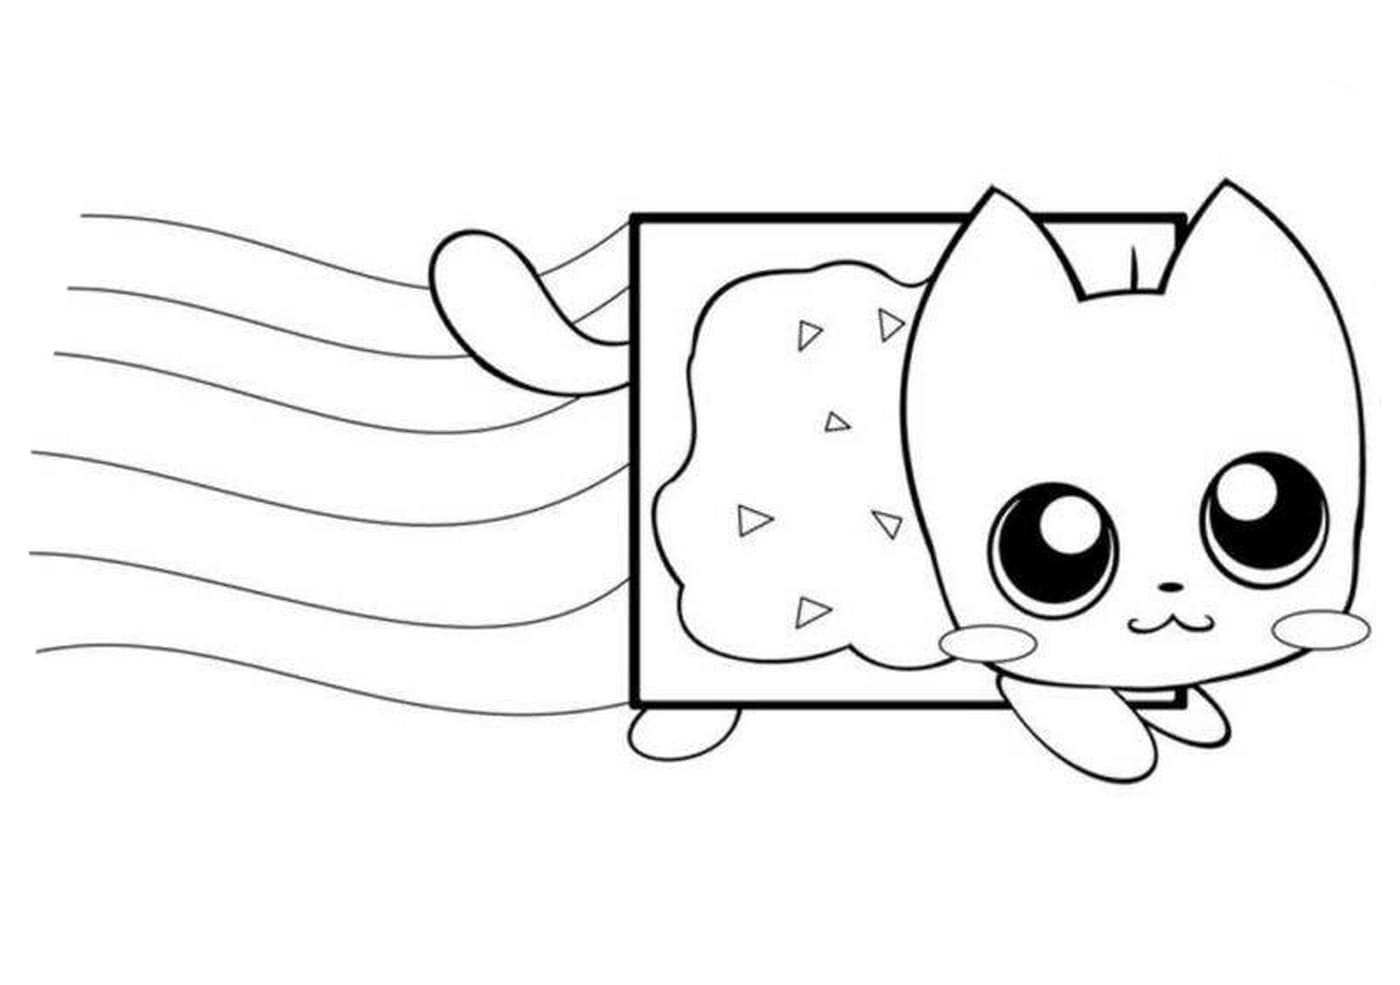 Nyan cat coloring pages free printable coloring pages